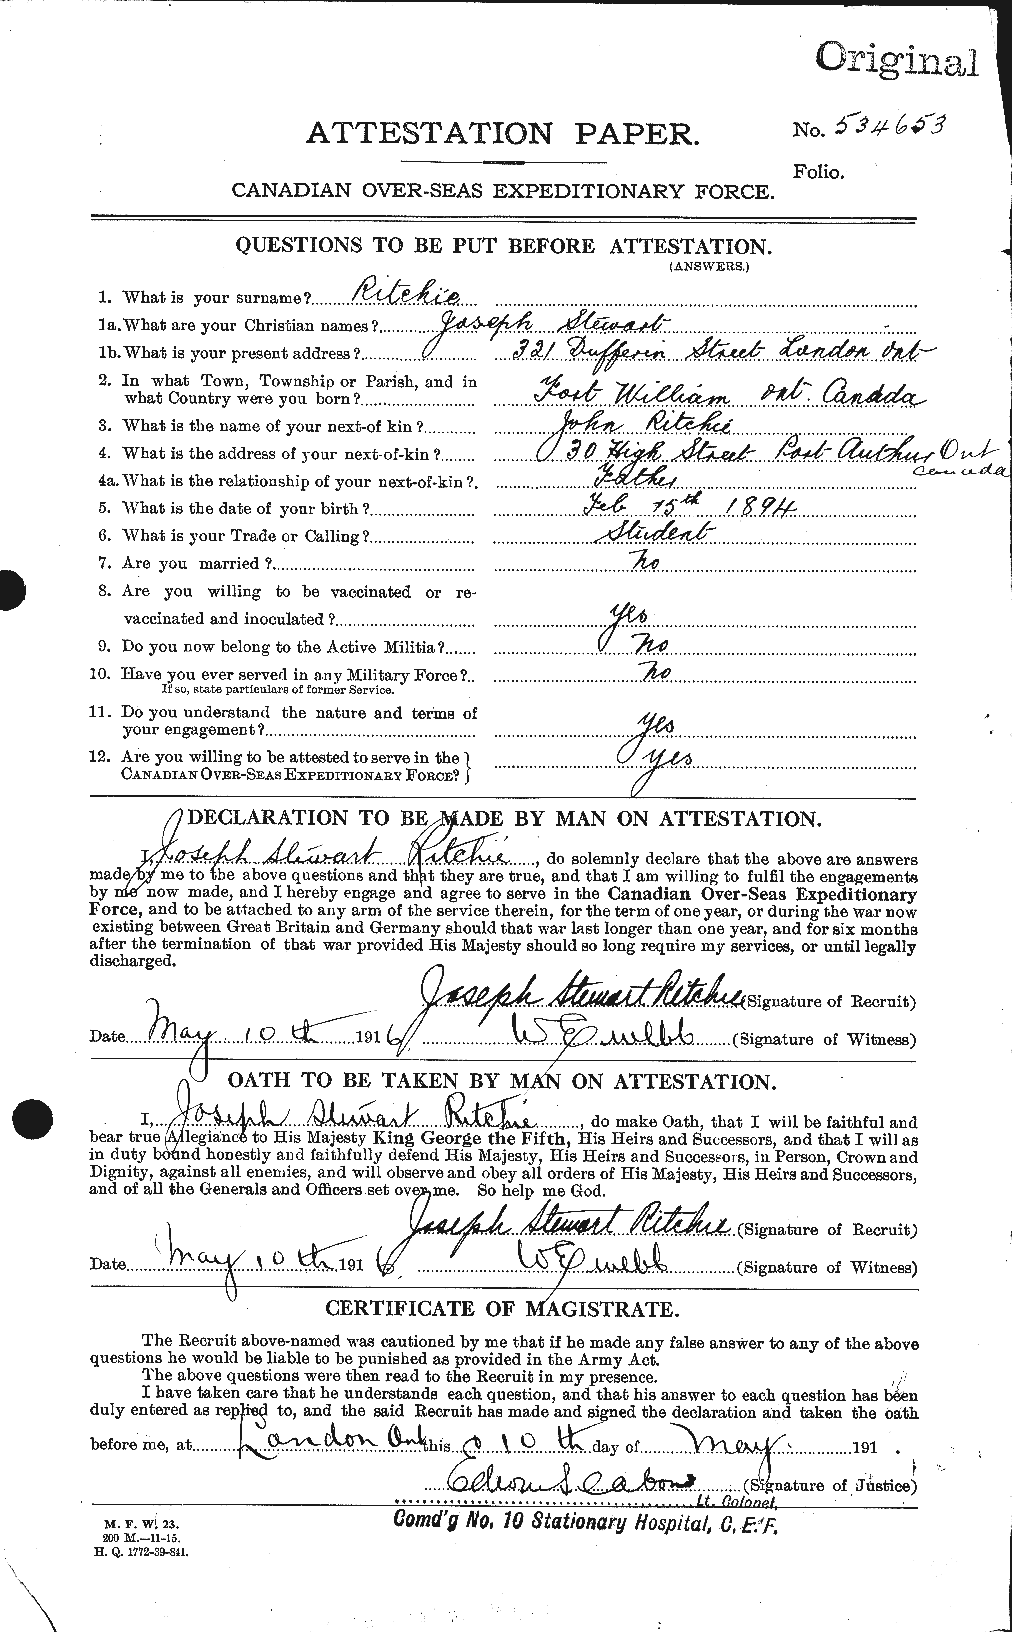 Personnel Records of the First World War - CEF 605355a